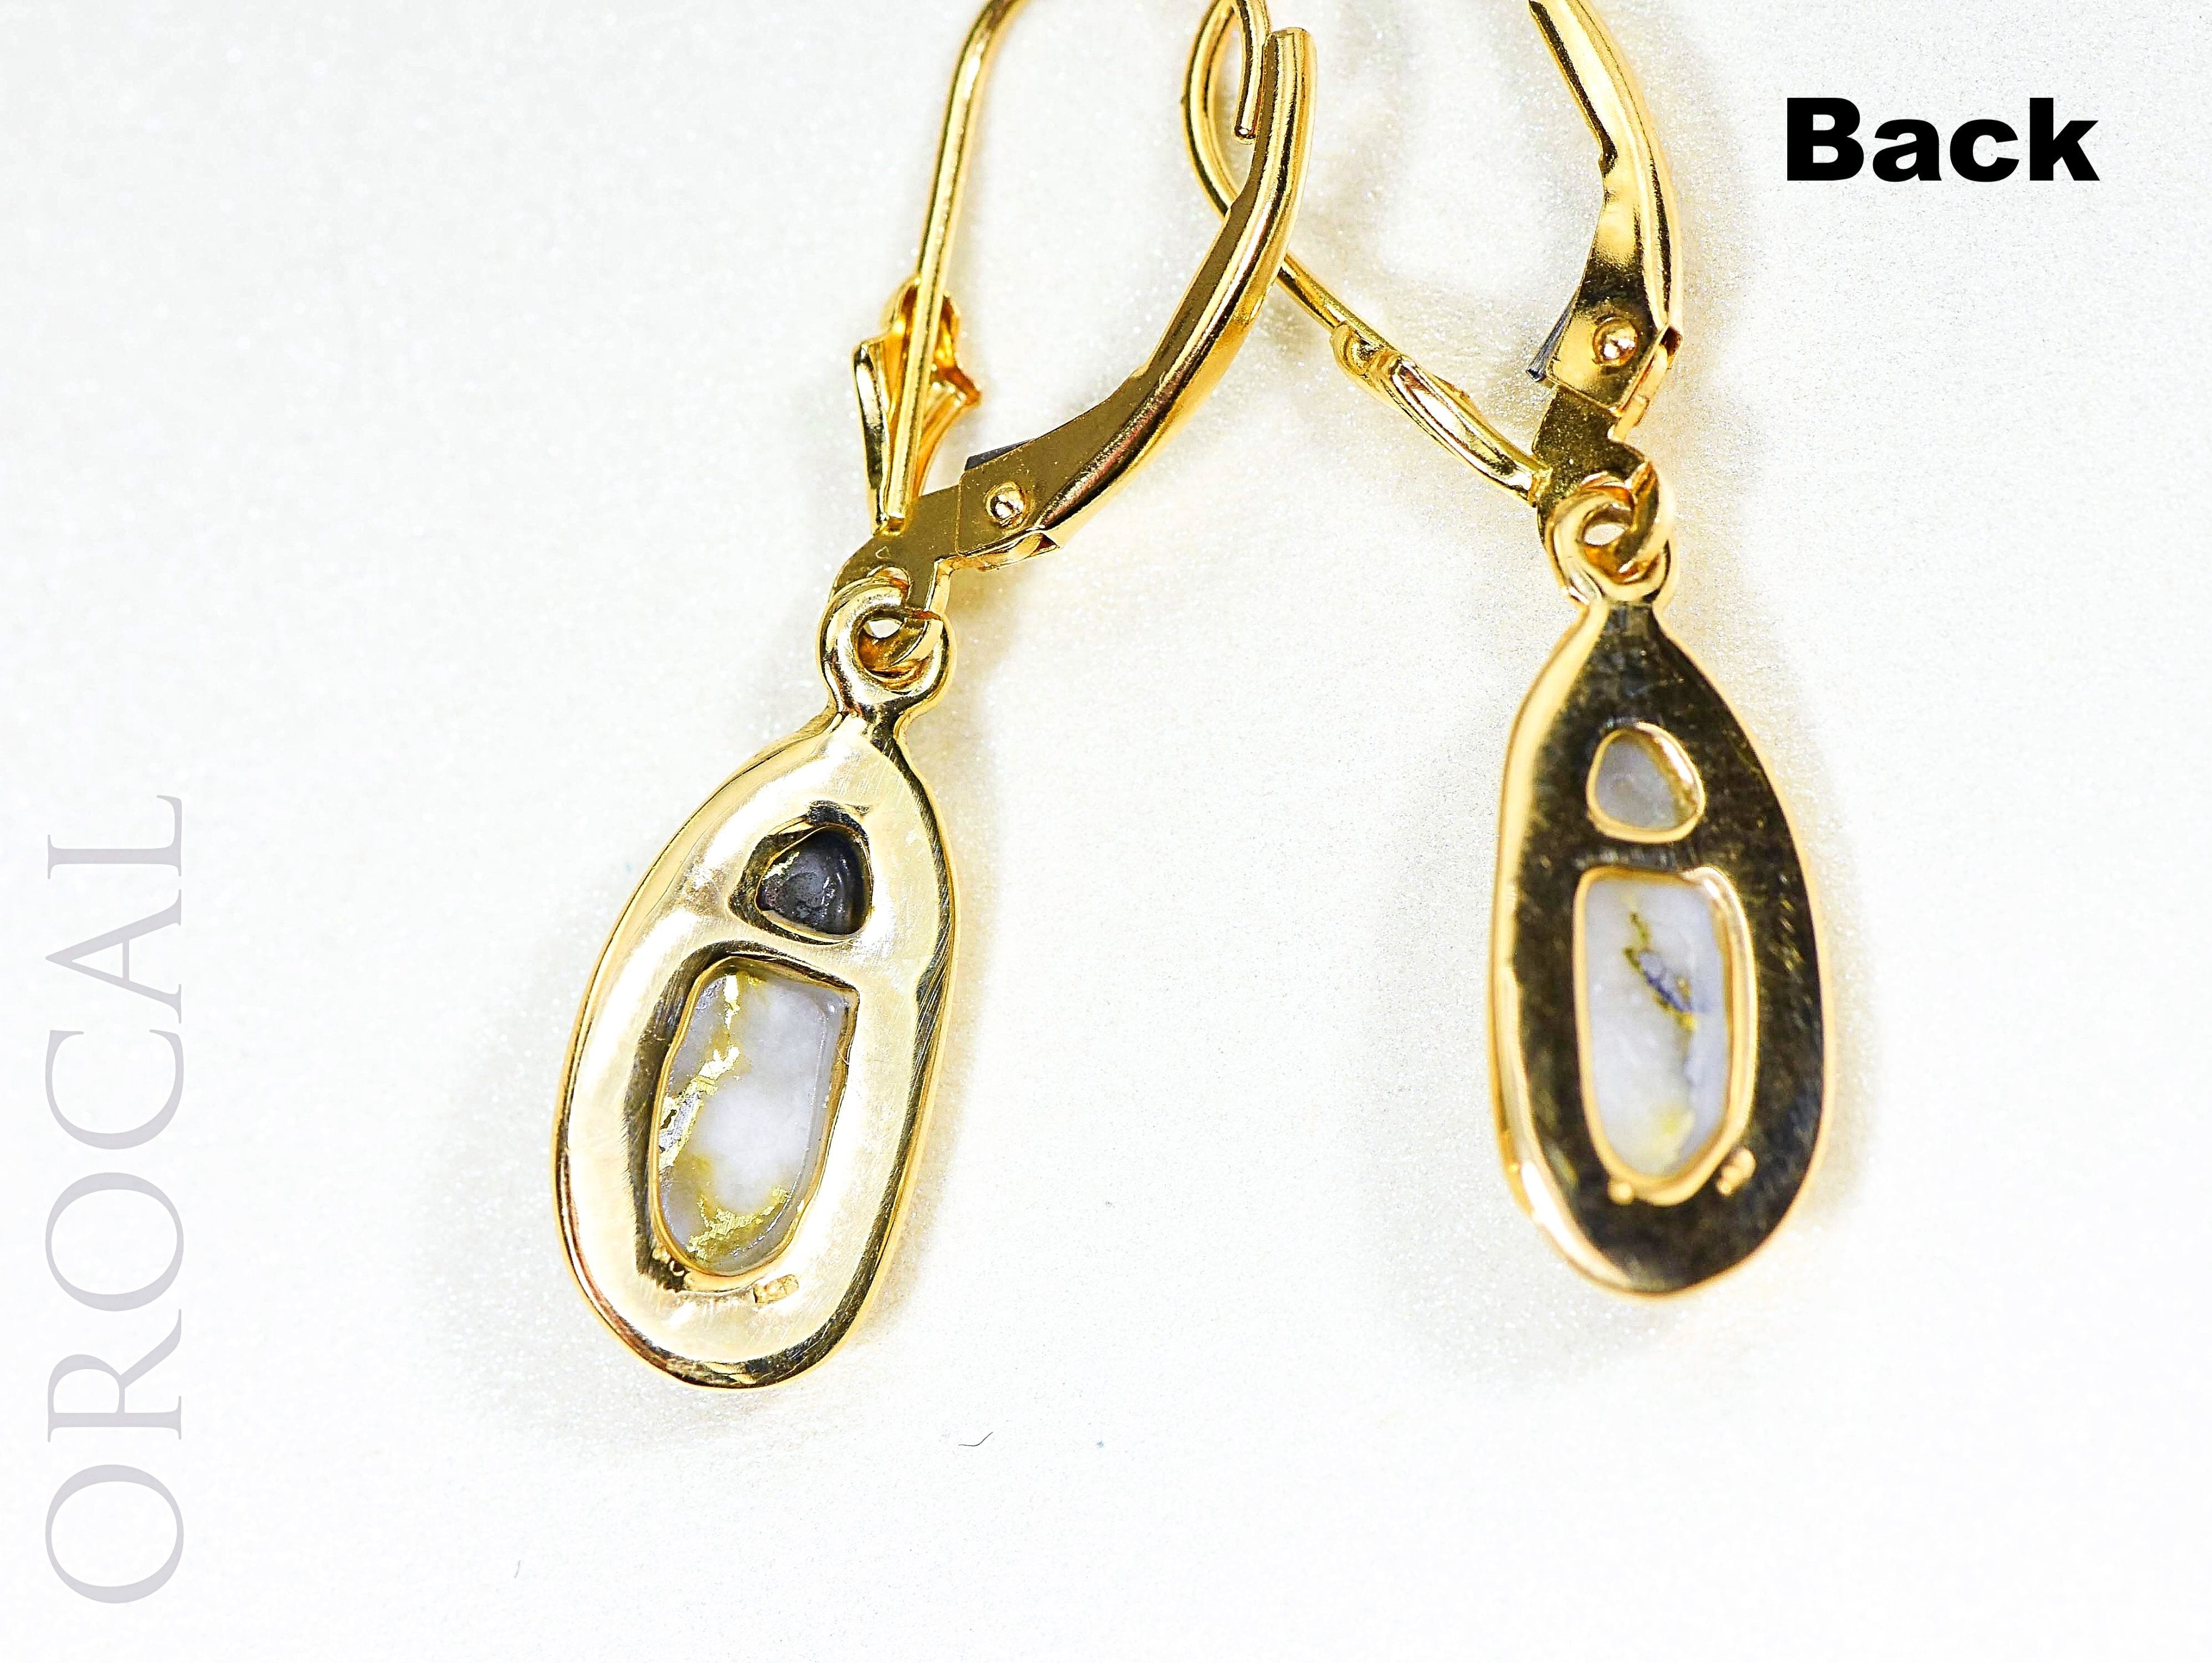 Gold Quartz Earrings "Orocal" EN762Q/LB Genuine Hand Crafted Jewelry - 14K Gold Casting